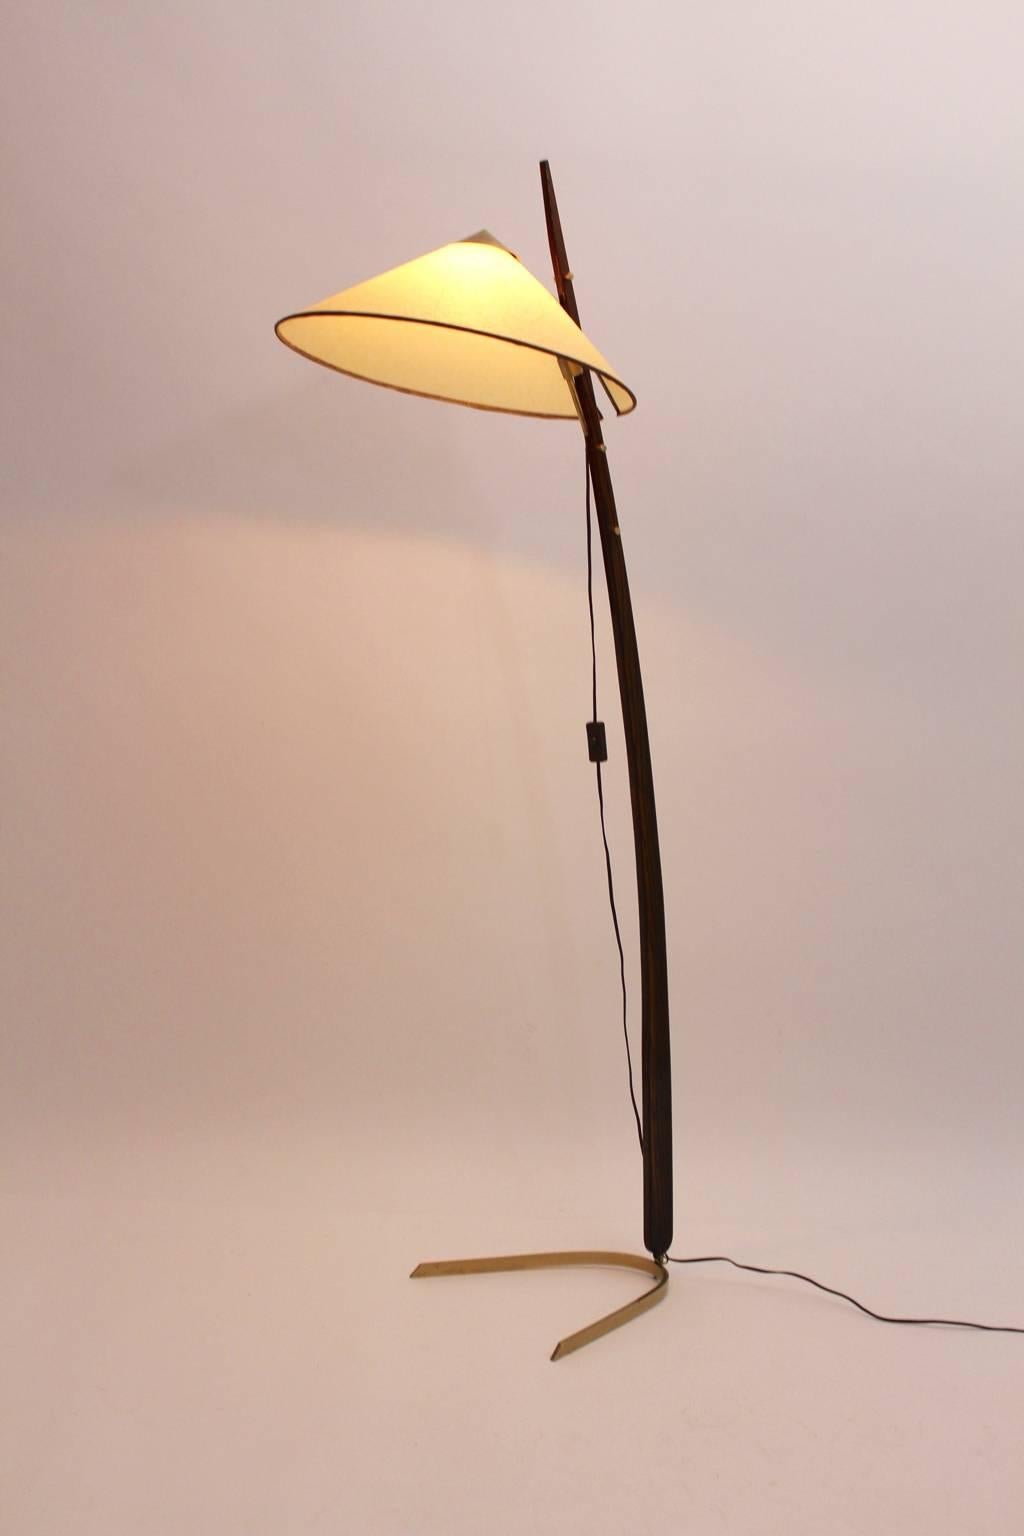 A mid century modern brass floor lamp with a curved stem, which was made out of solid oakwood and a brass foot and brass fittings. On the top sits a parchment paper shade.
The shade is adjustable from up to down in four positions.
One socket E